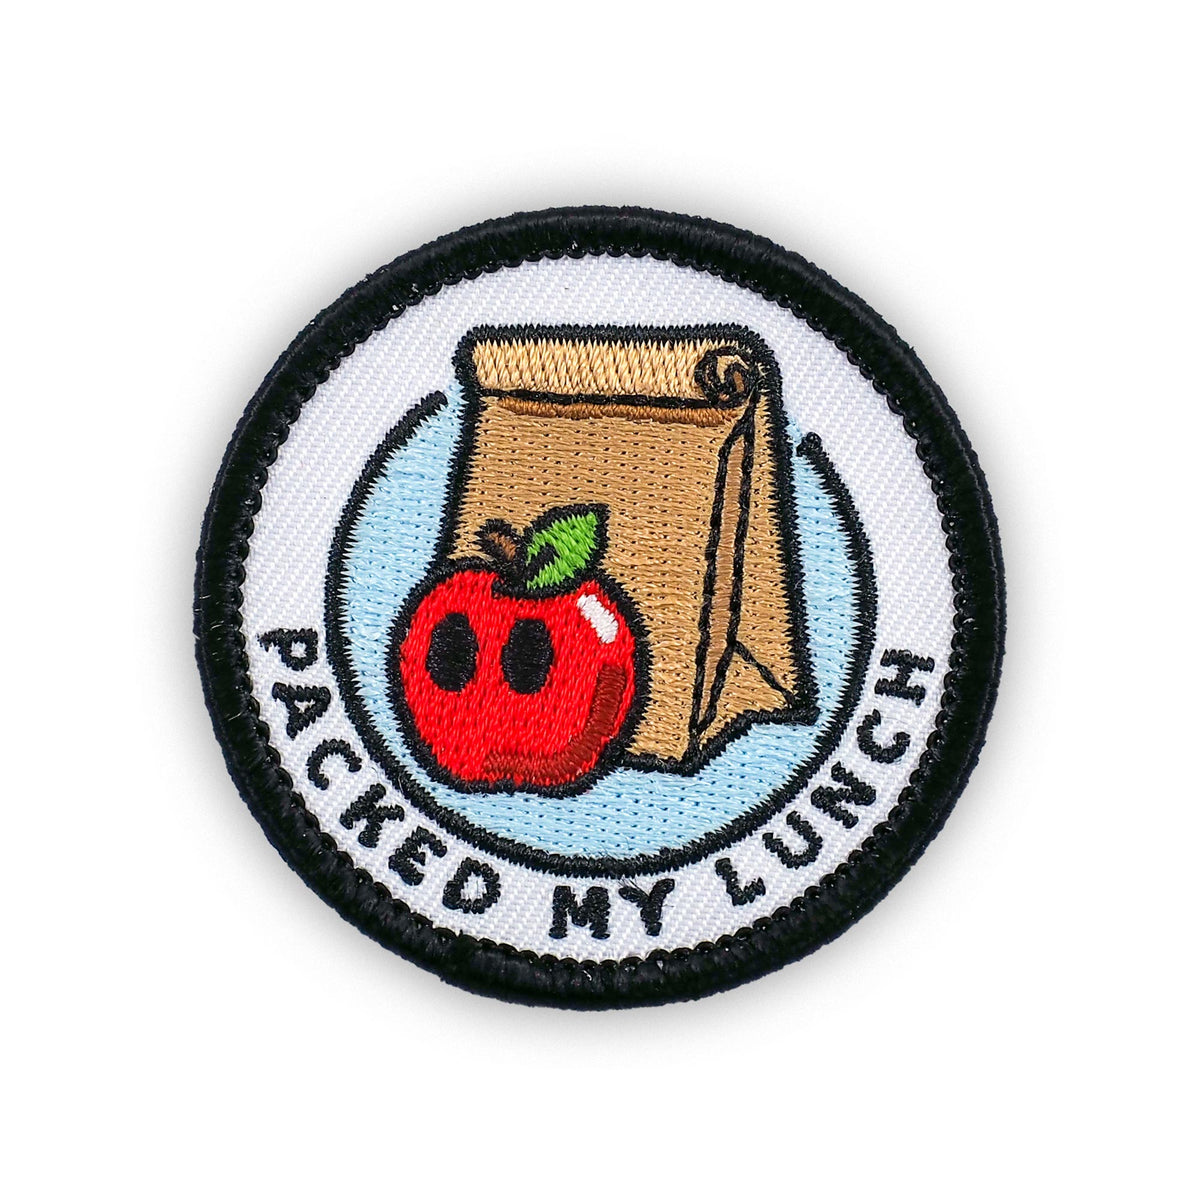 Packed My Lunch adulting merit badge patch for adults